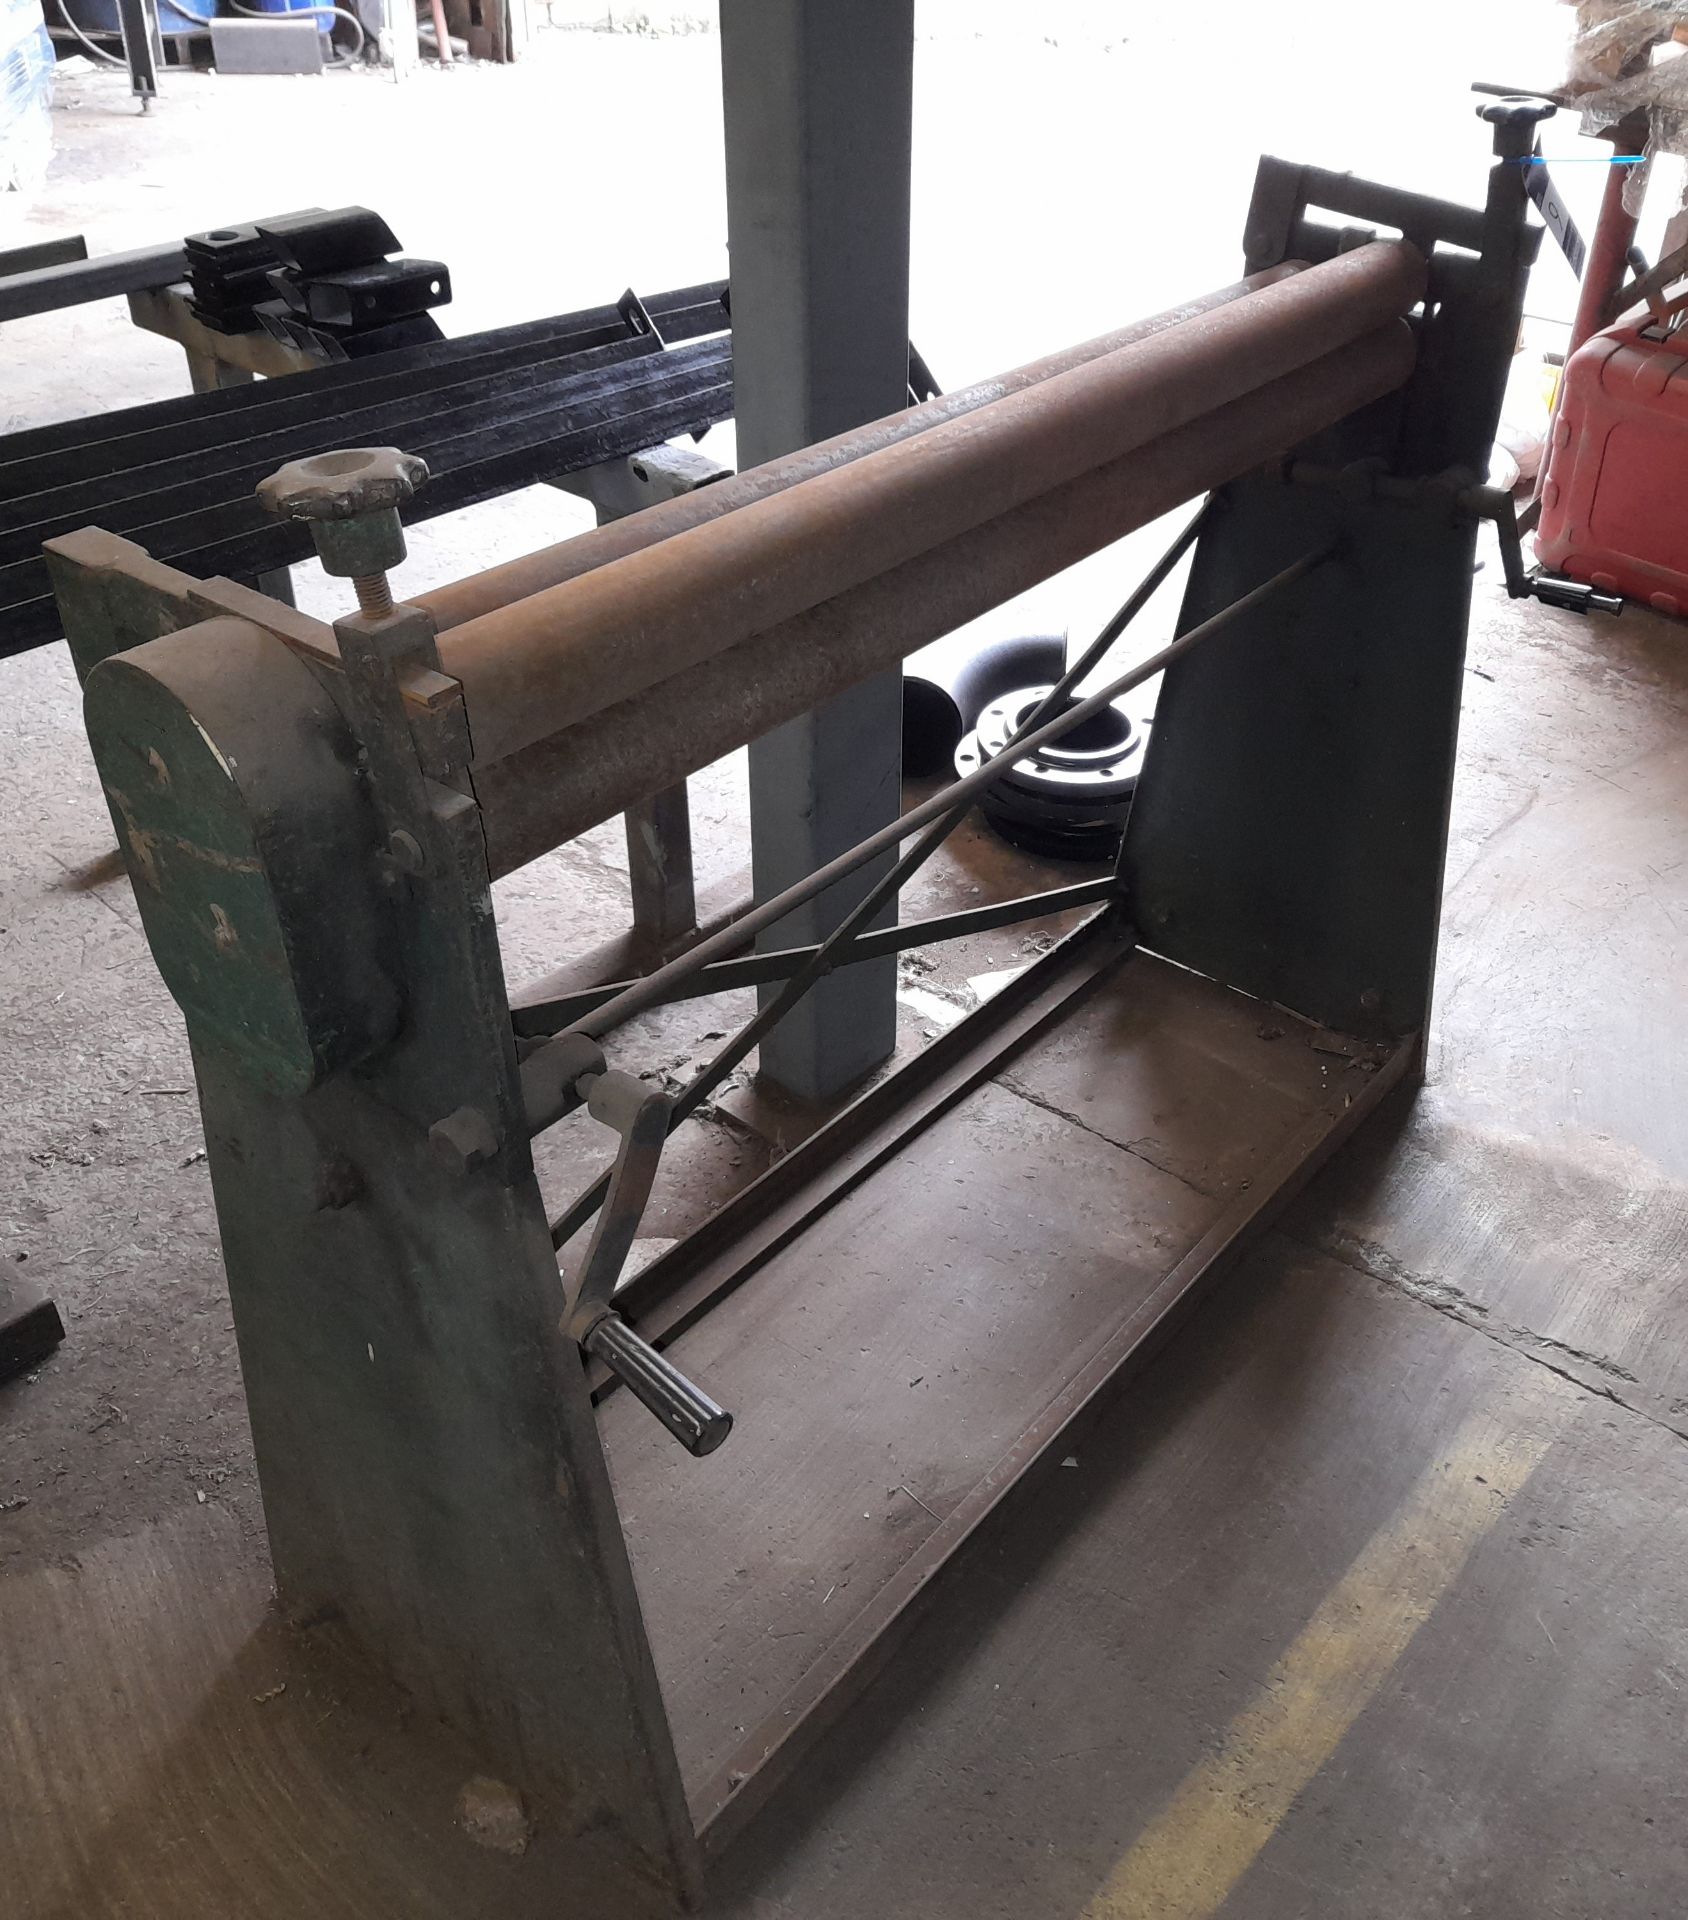 Shorte Engineering Manual Rollers, Approx 1270 length, Serial Number 146 (Location – Stoke) - Image 3 of 3